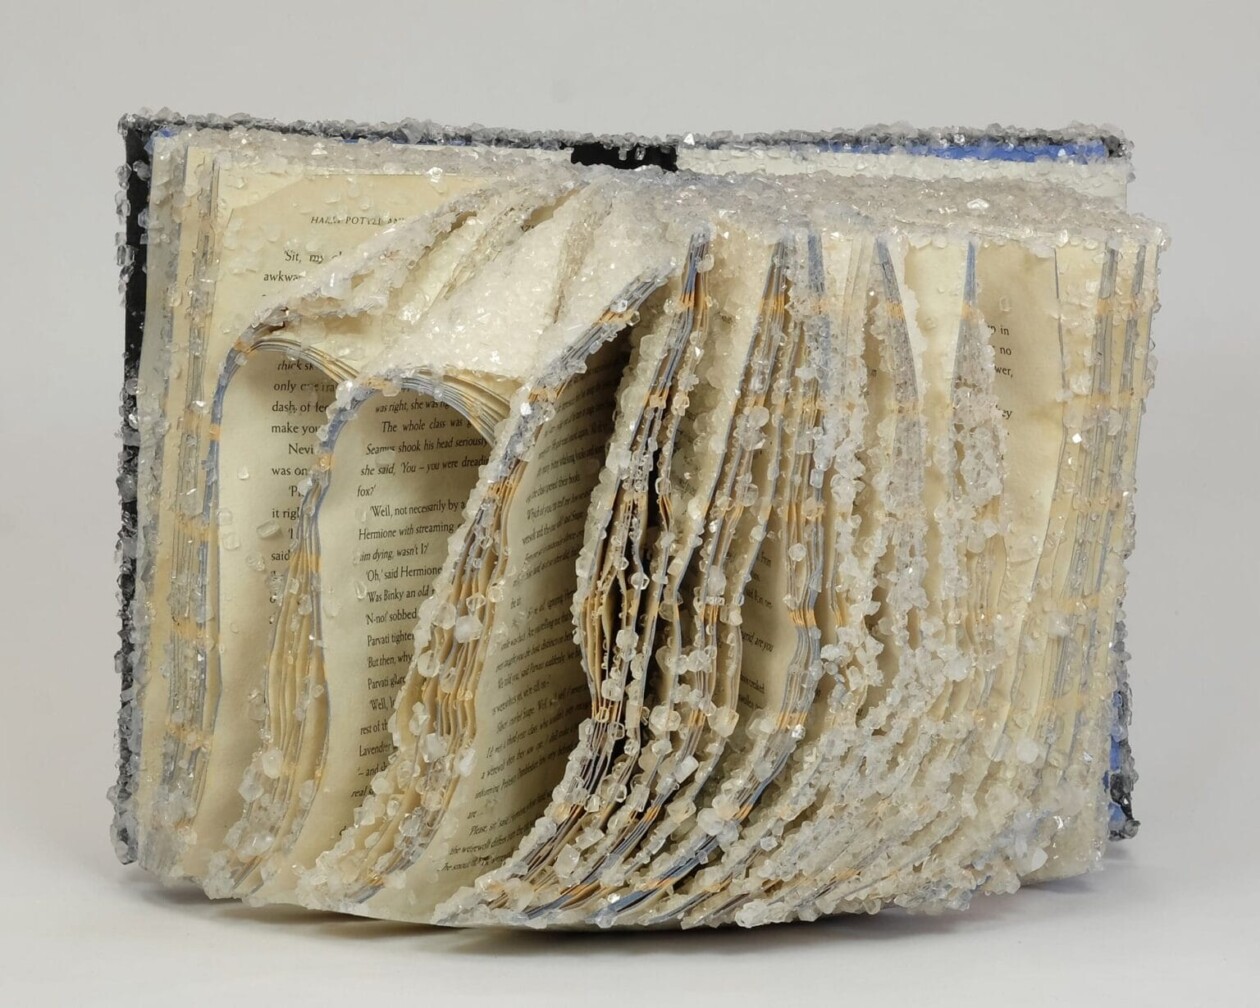 Crystallized Books, A Sculptures Series By Alexis Arnold (18)